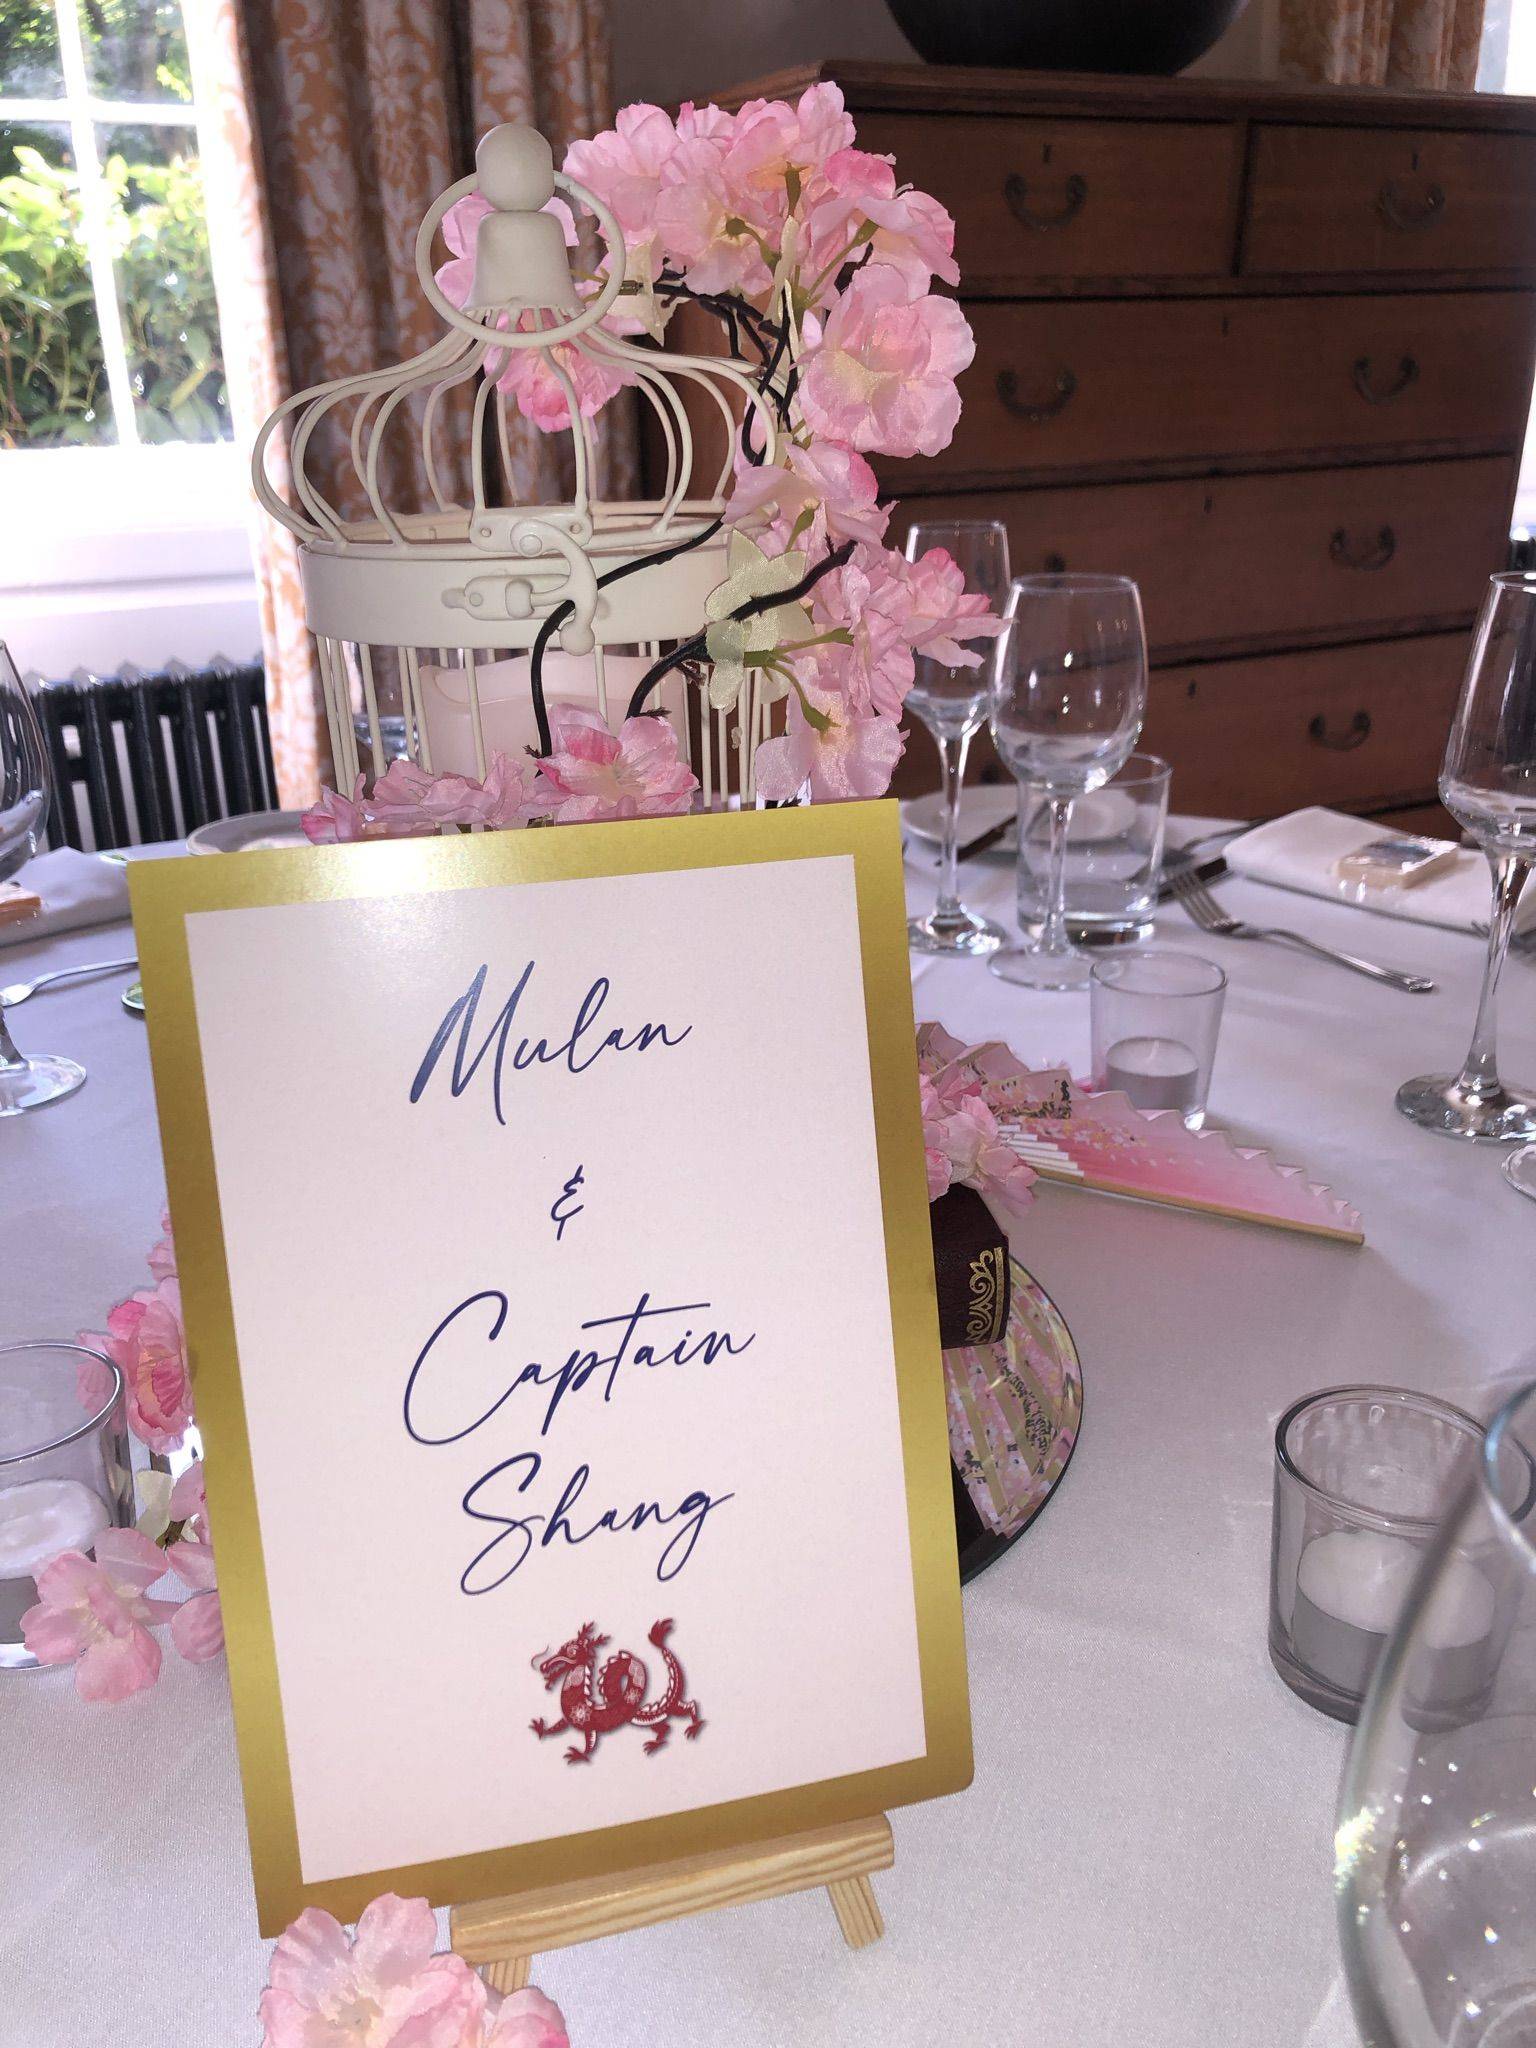 a table is set with a sign and wine glasses.